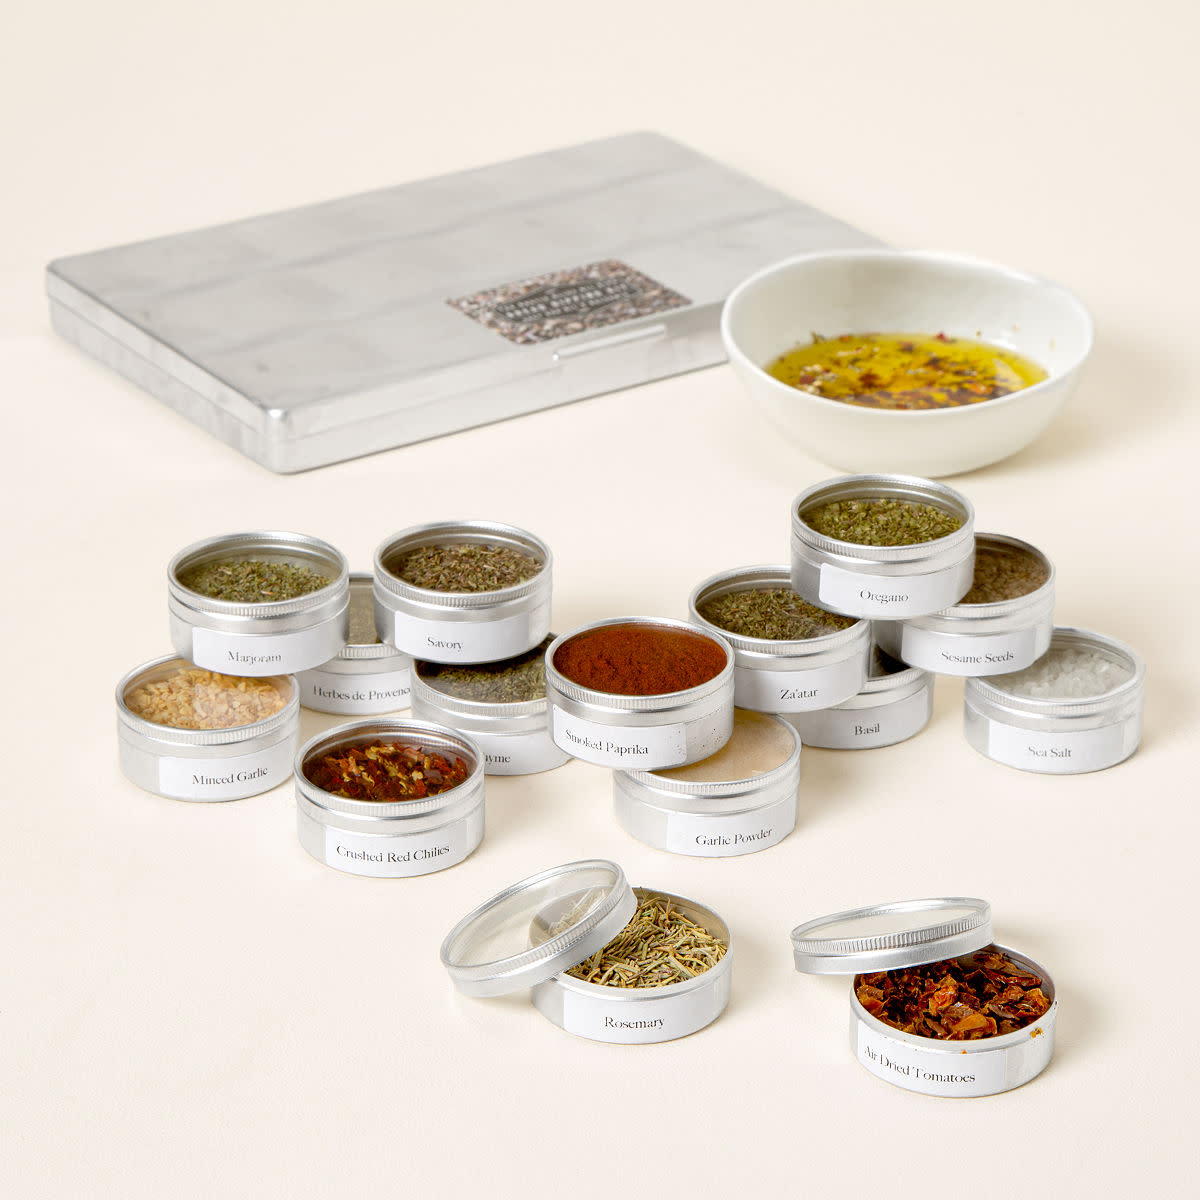 Gourmet Oil Dipping Spice Kit (Uncommon Goods / Uncommon Goods)